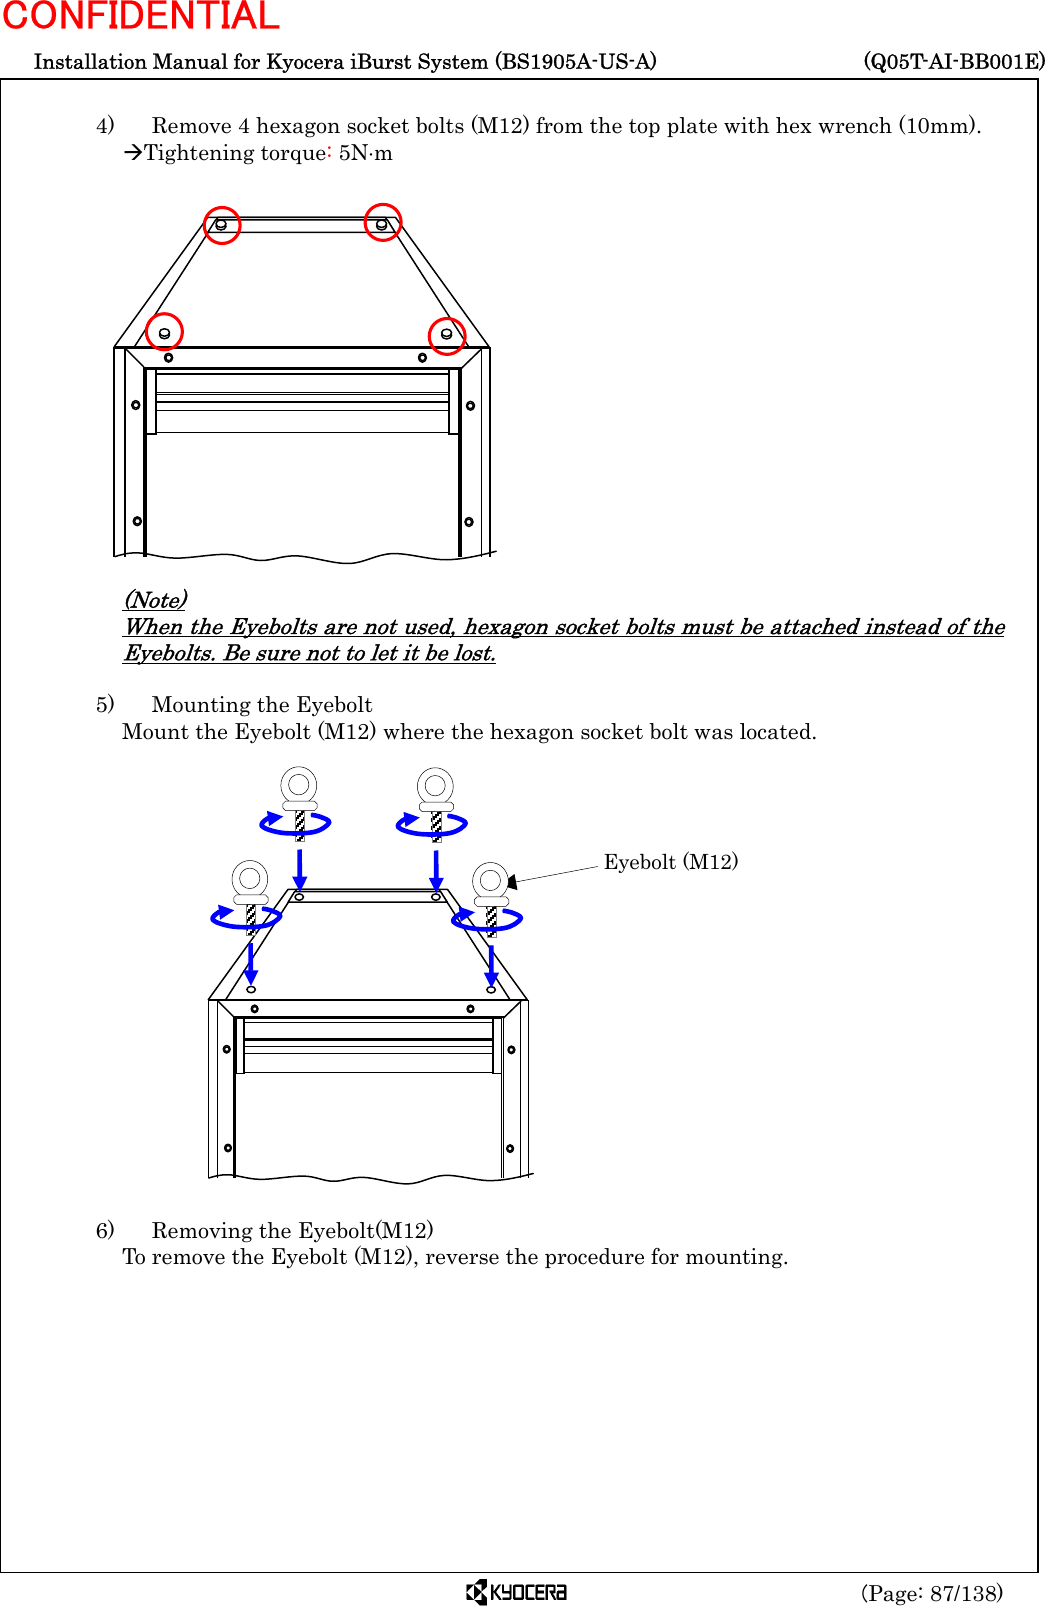  Installation Manual for Kyocera iBurst System (BS1905A-US-A)     (Q05T-AI-BB001E) (Page: 87/138) CONFIDENTIAL  4)    Remove 4 hexagon socket bolts (M12) from the top plate with hex wrench (10mm). ÆTightening torque: 5N⋅m                 (Note) When the Eyebolts are not used, hexagon socket bolts must be attached instead of the Eyebolts. Be sure not to let it be lost.  5)    Mounting the Eyebolt Mount the Eyebolt (M12) where the hexagon socket bolt was located.                   6)    Removing the Eyebolt(M12)   To remove the Eyebolt (M12), reverse the procedure for mounting.      Eyebolt (M12) 